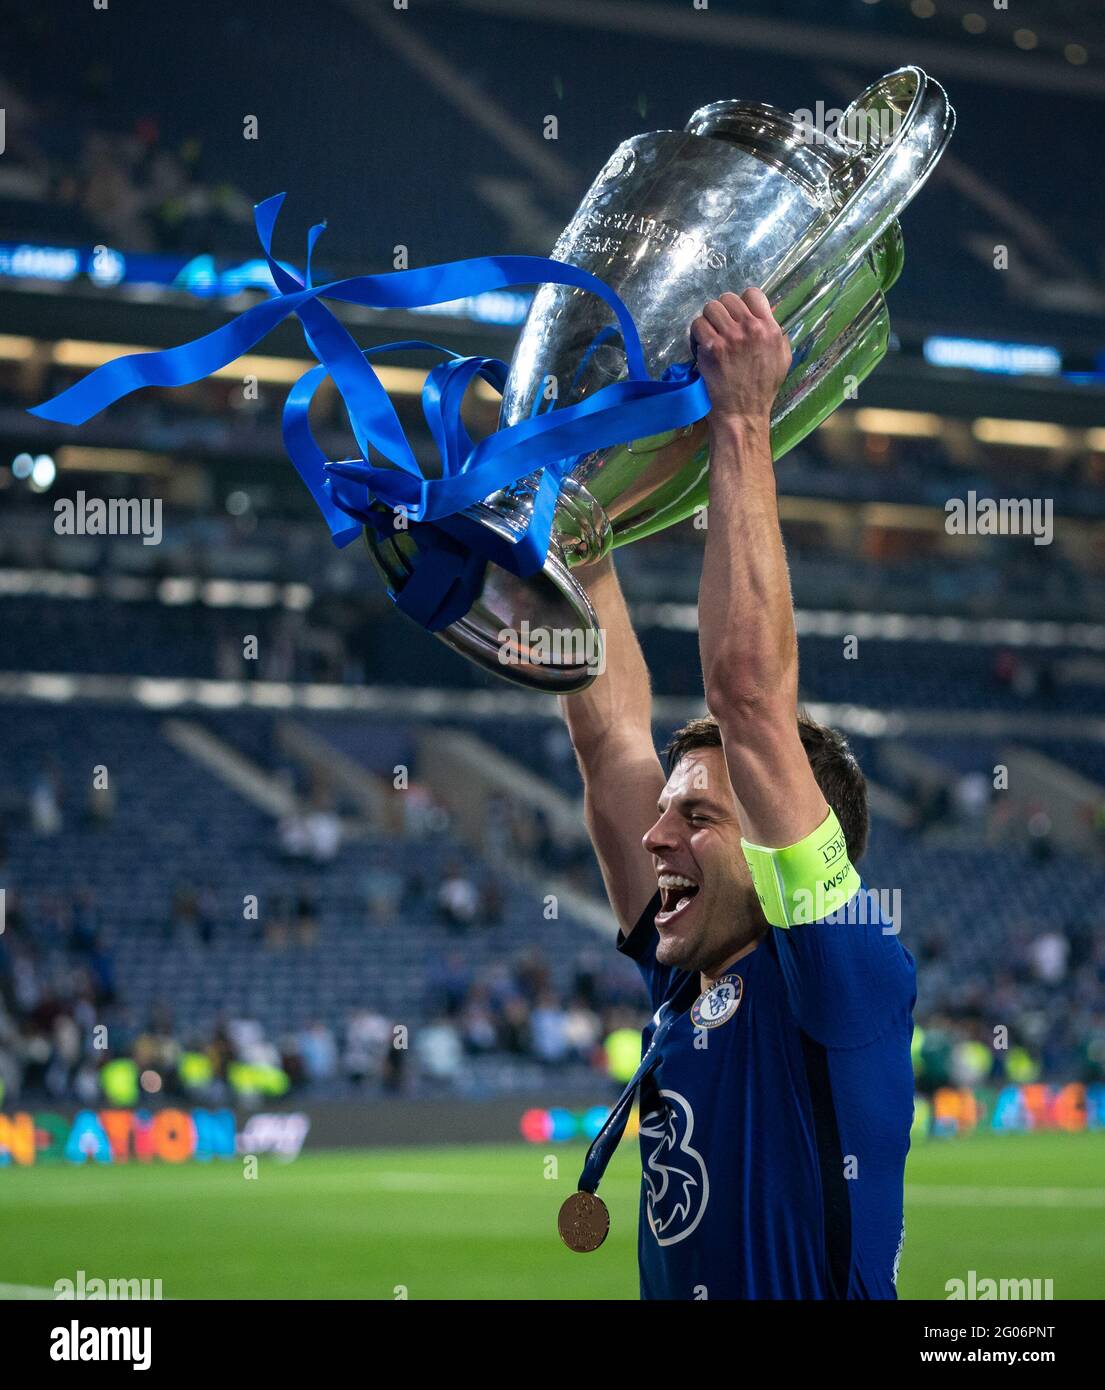 Ryal Quay Uk 29th May 21 Czsar Azpilicueta Of Chelsea Lifts The Winning Trophy Following The Uefa Champions League Final Match Between Manchester City And Chelsea At The Est Dio Do Drag O Porto